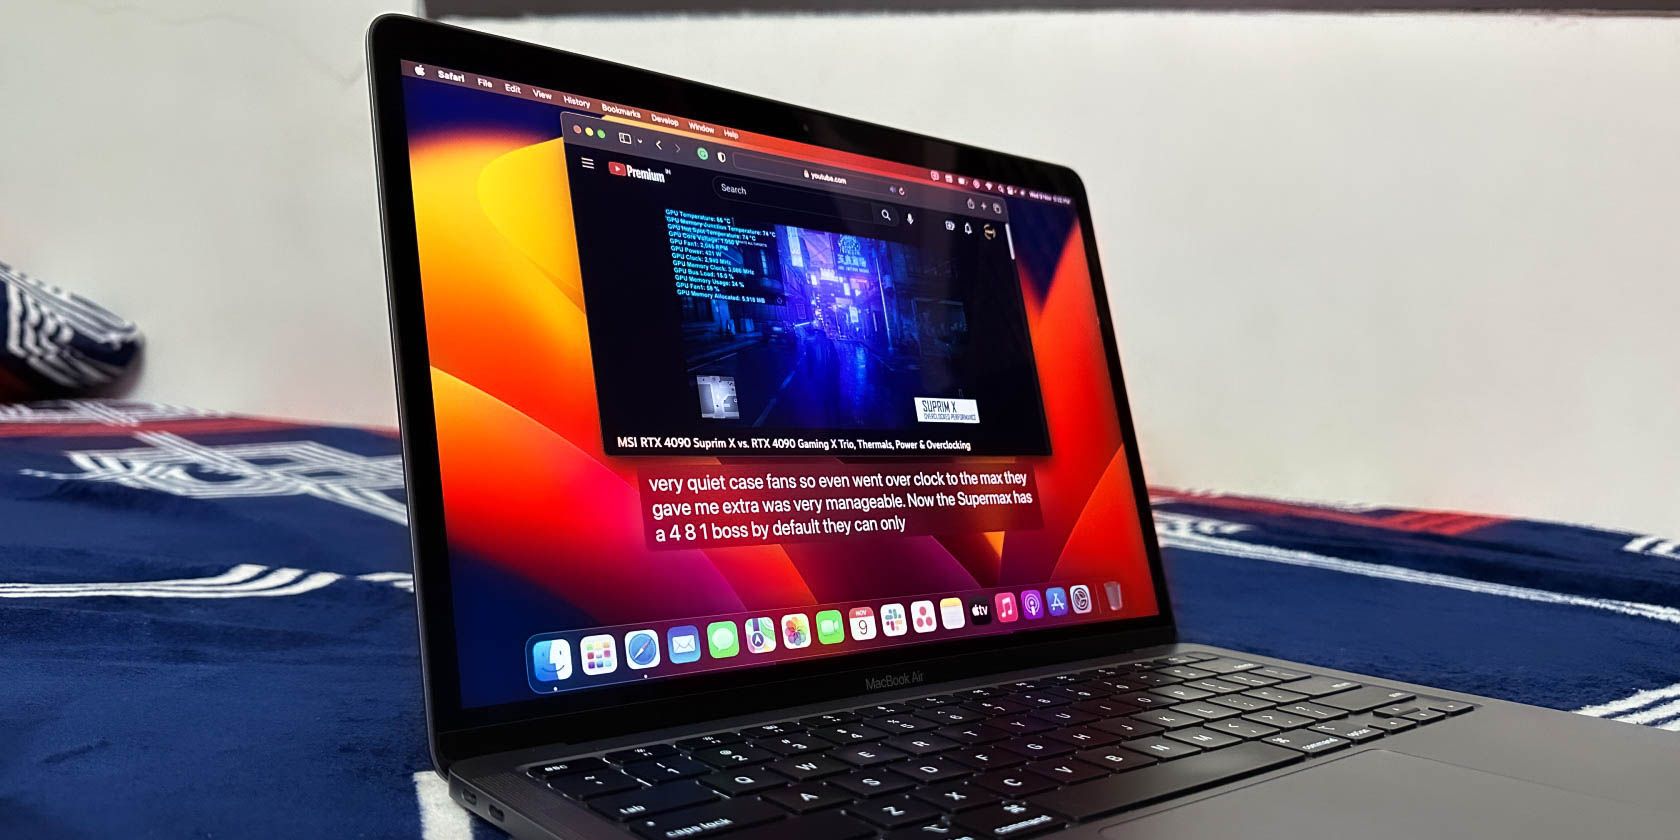 Live Captions feature on a MacBook